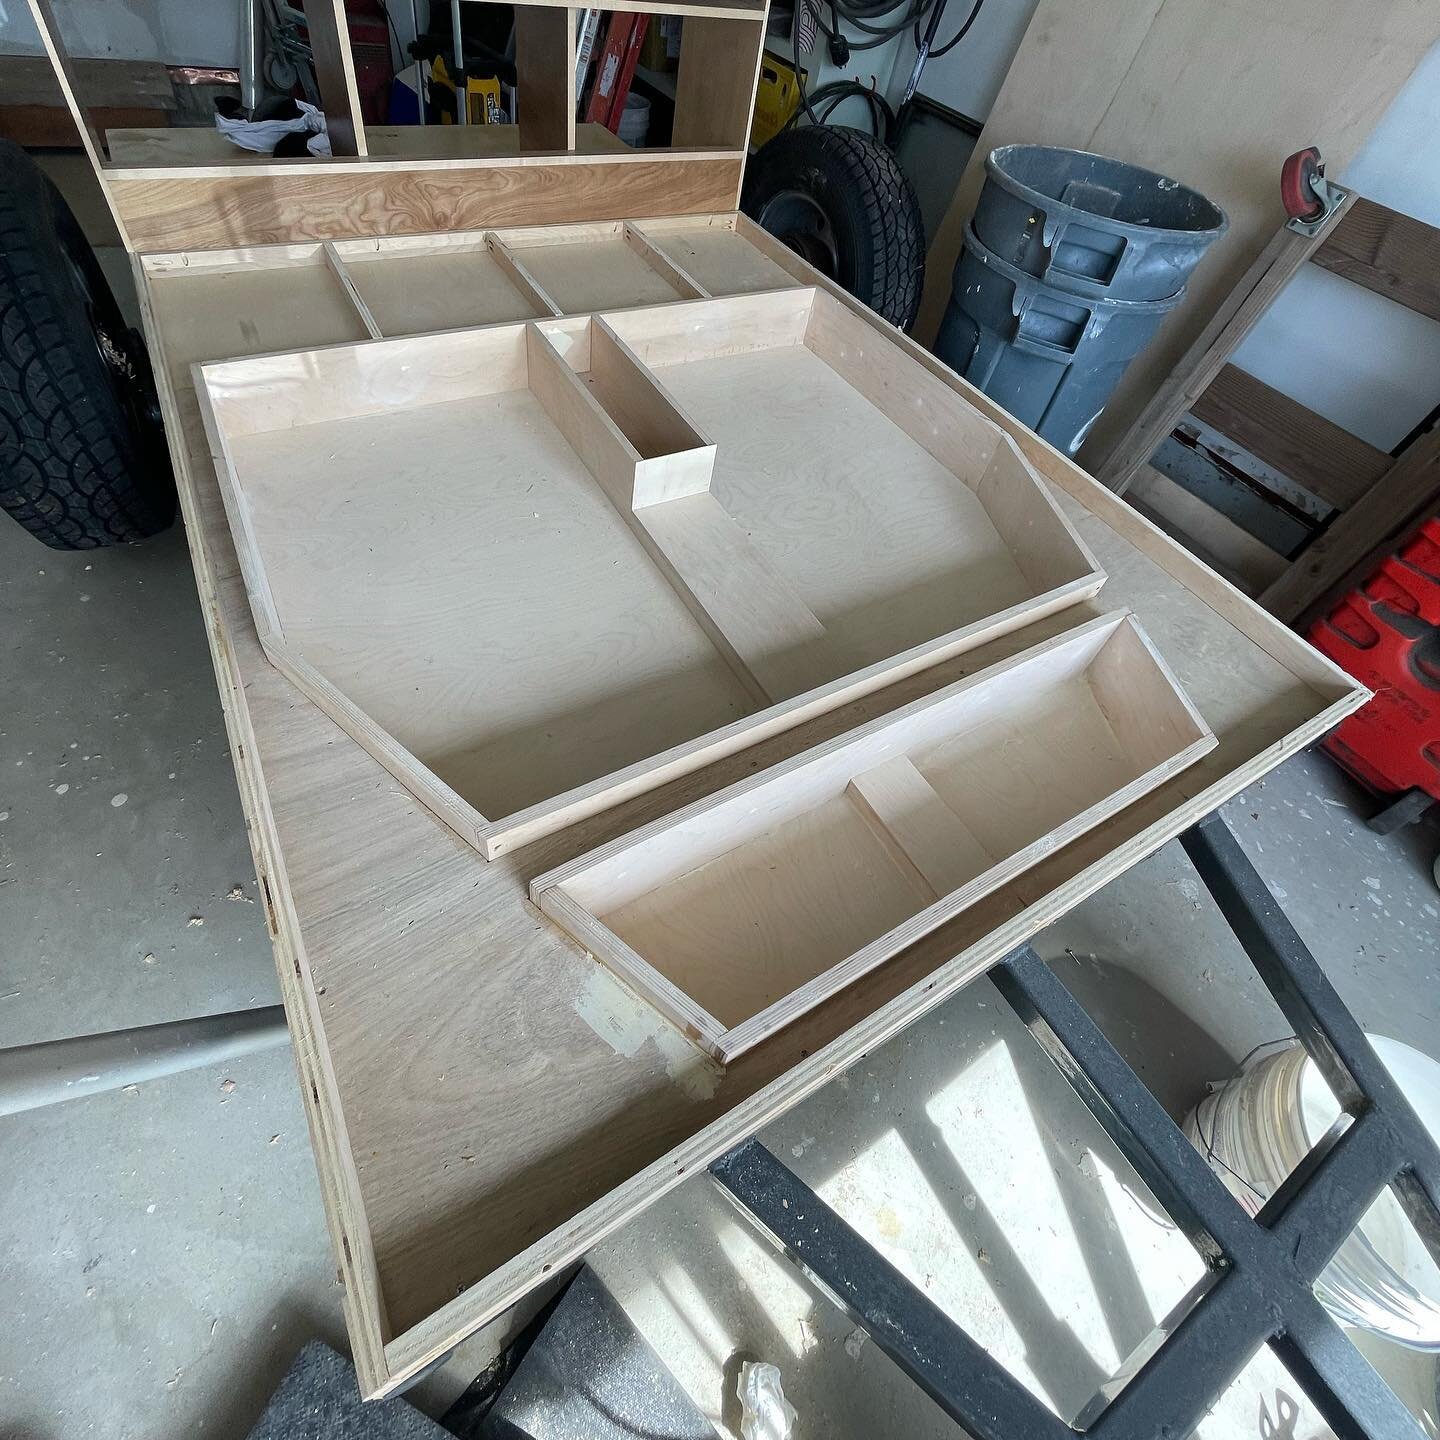 Some basement storage and floor progress on these beautiful spring days. And carpentry projects wouldn&rsquo;t be complete without a little blood, of course. 

&hellip;

#teardropthalassa #teardrop #teardroptrailer #teardropcamper #teardroptrailers #